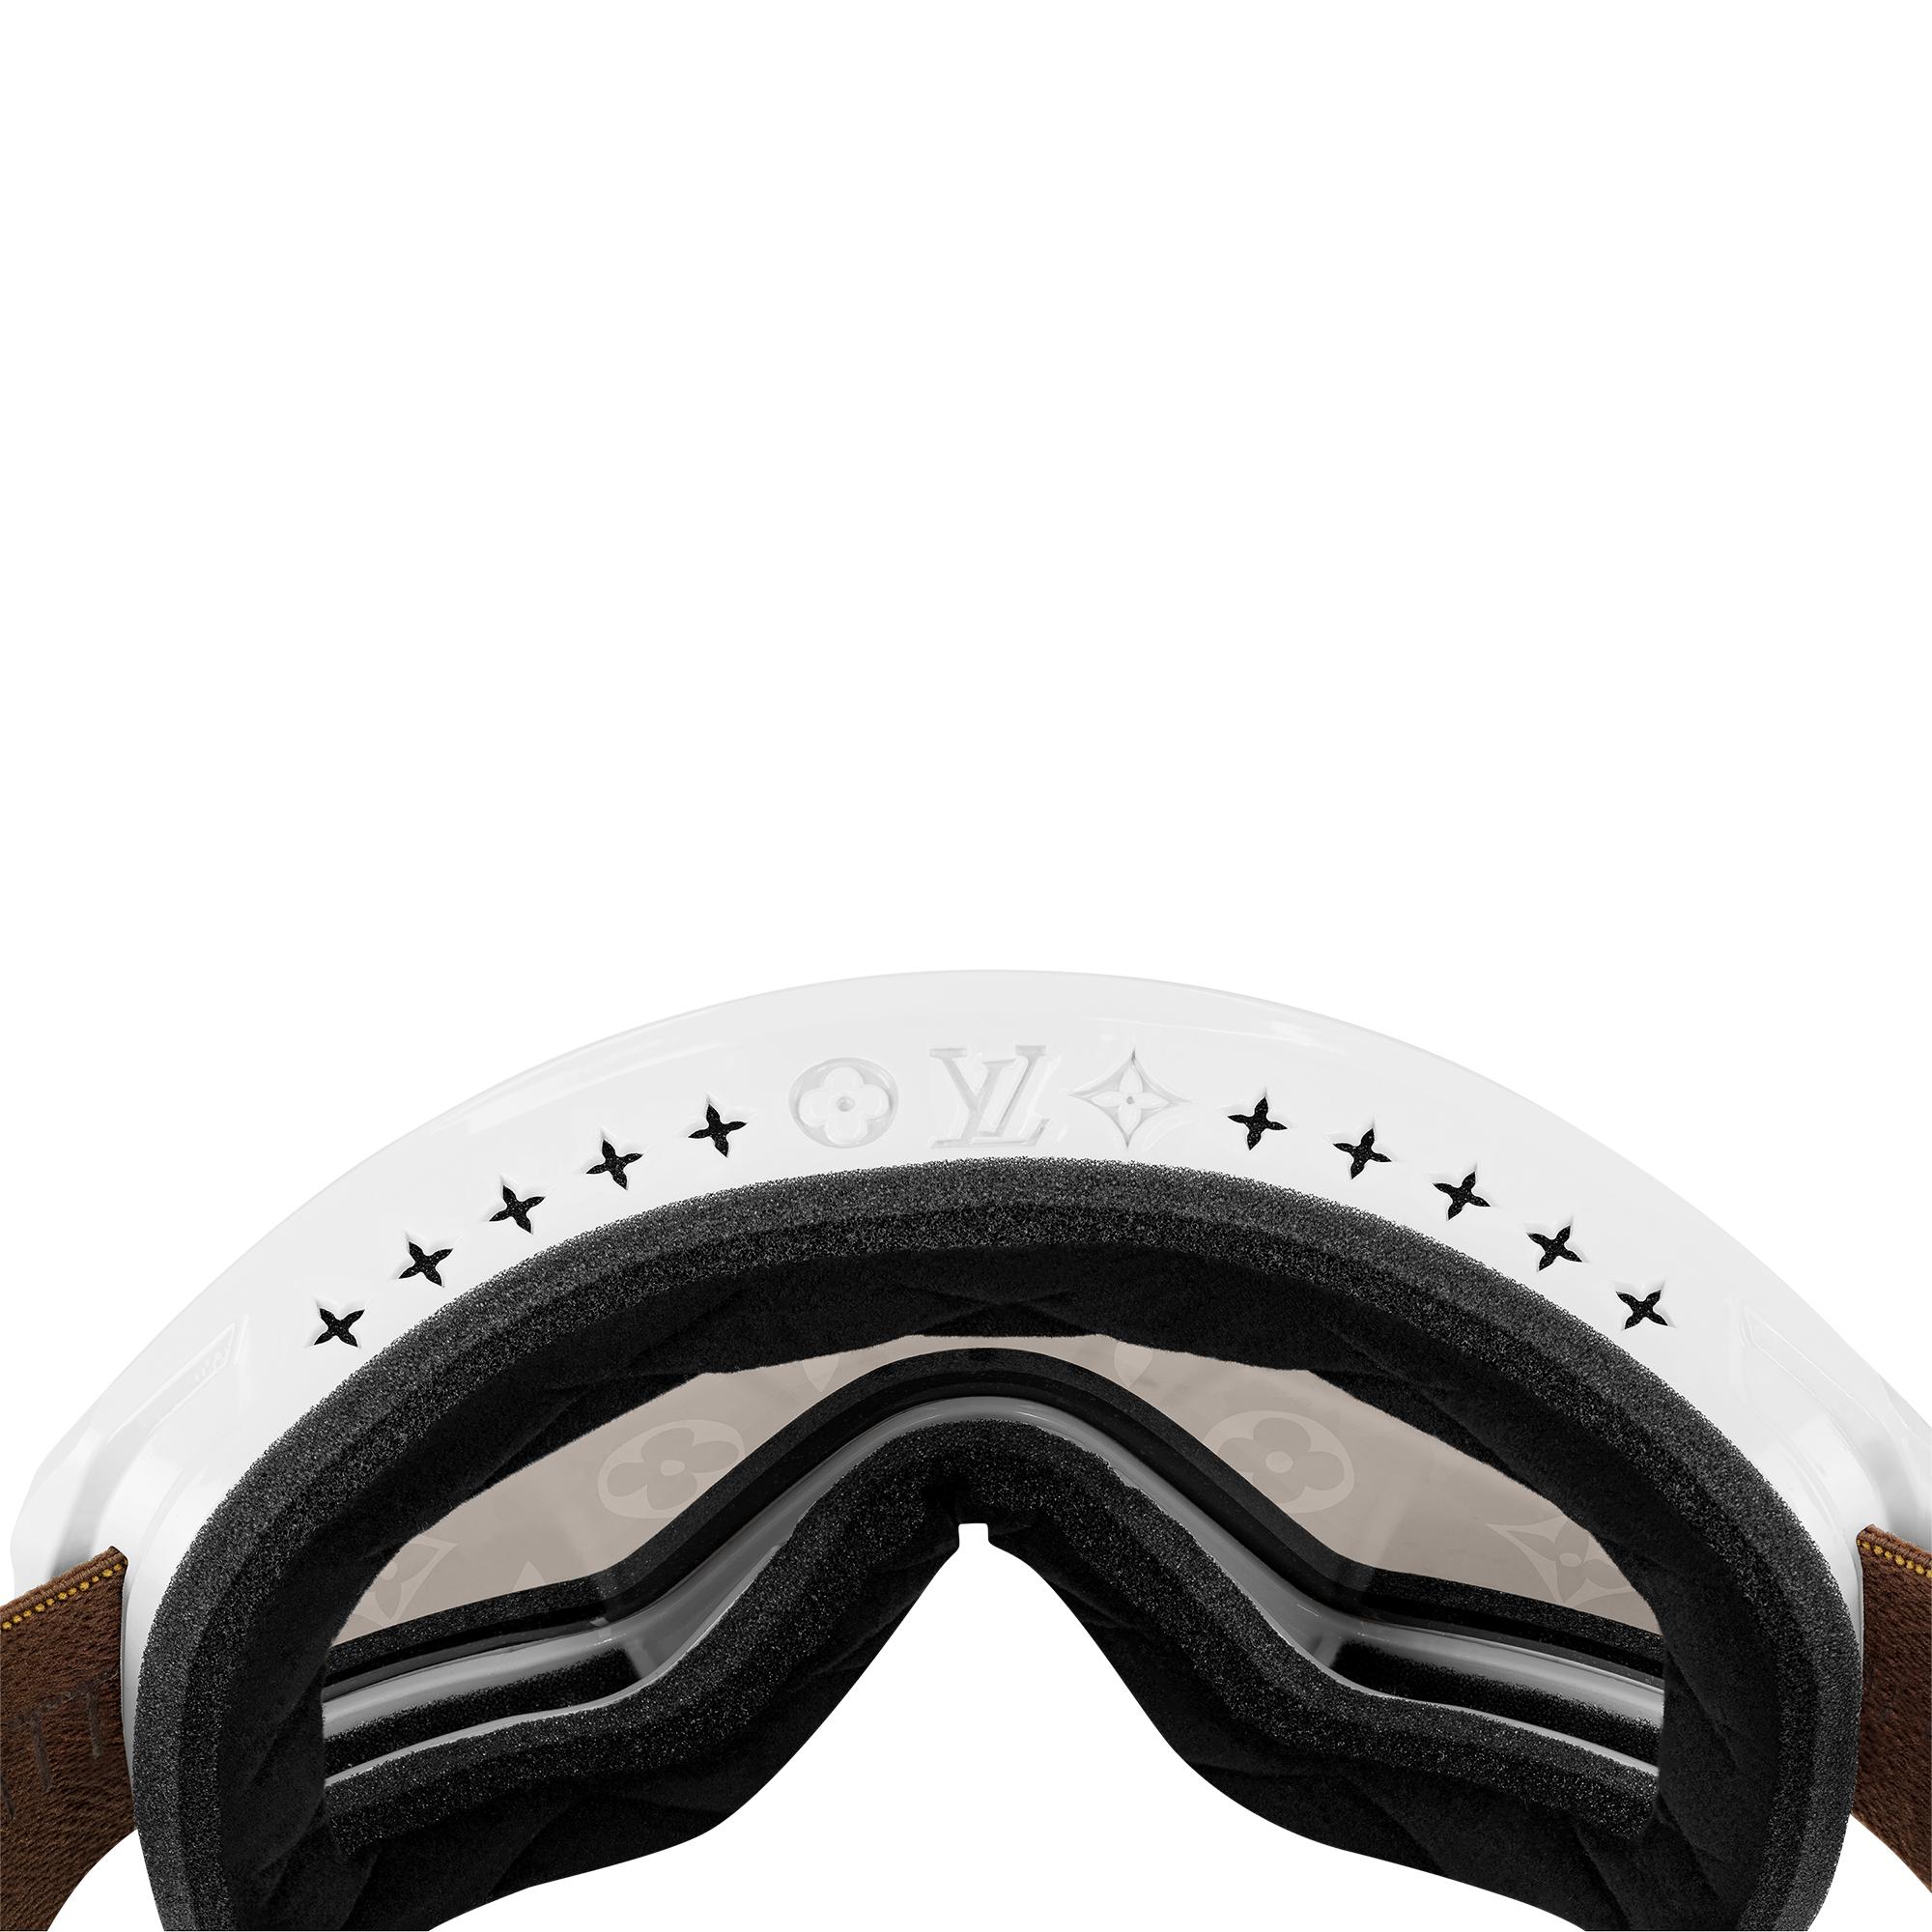 LV Snow Mask S00 - Sport and Lifestyle